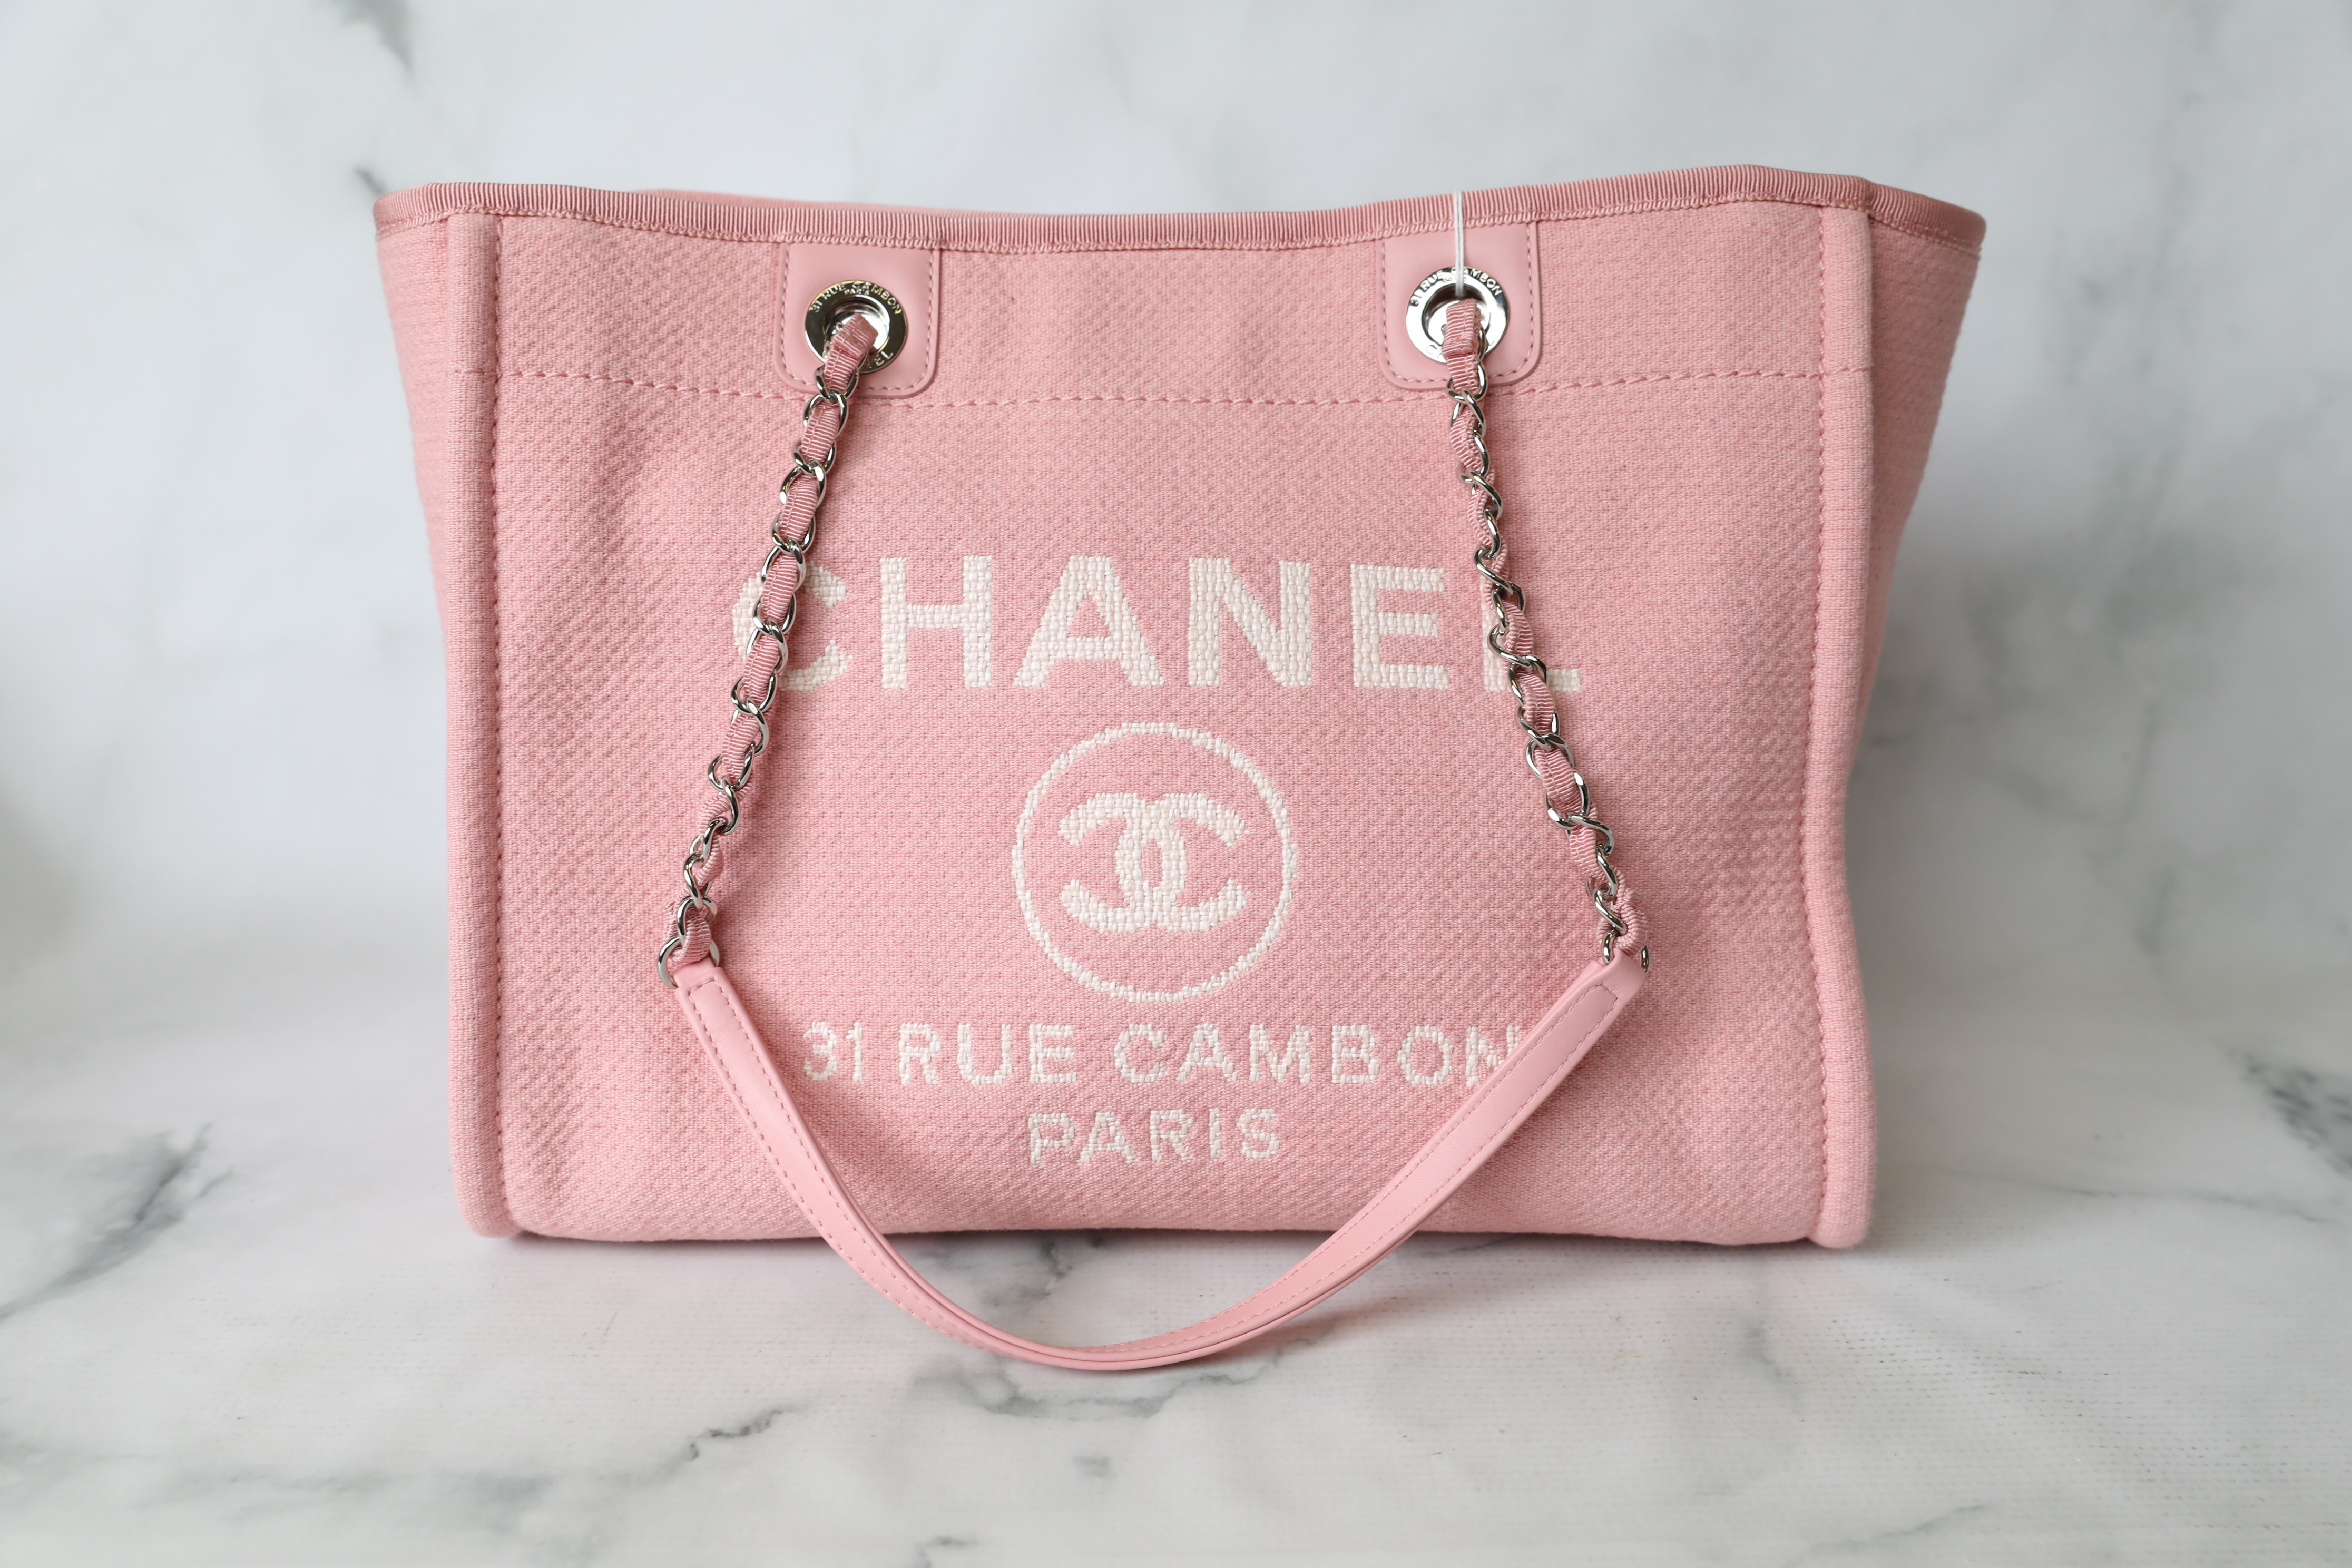 Chanel Deauville Small, Pink Canvas with Silver Hardware